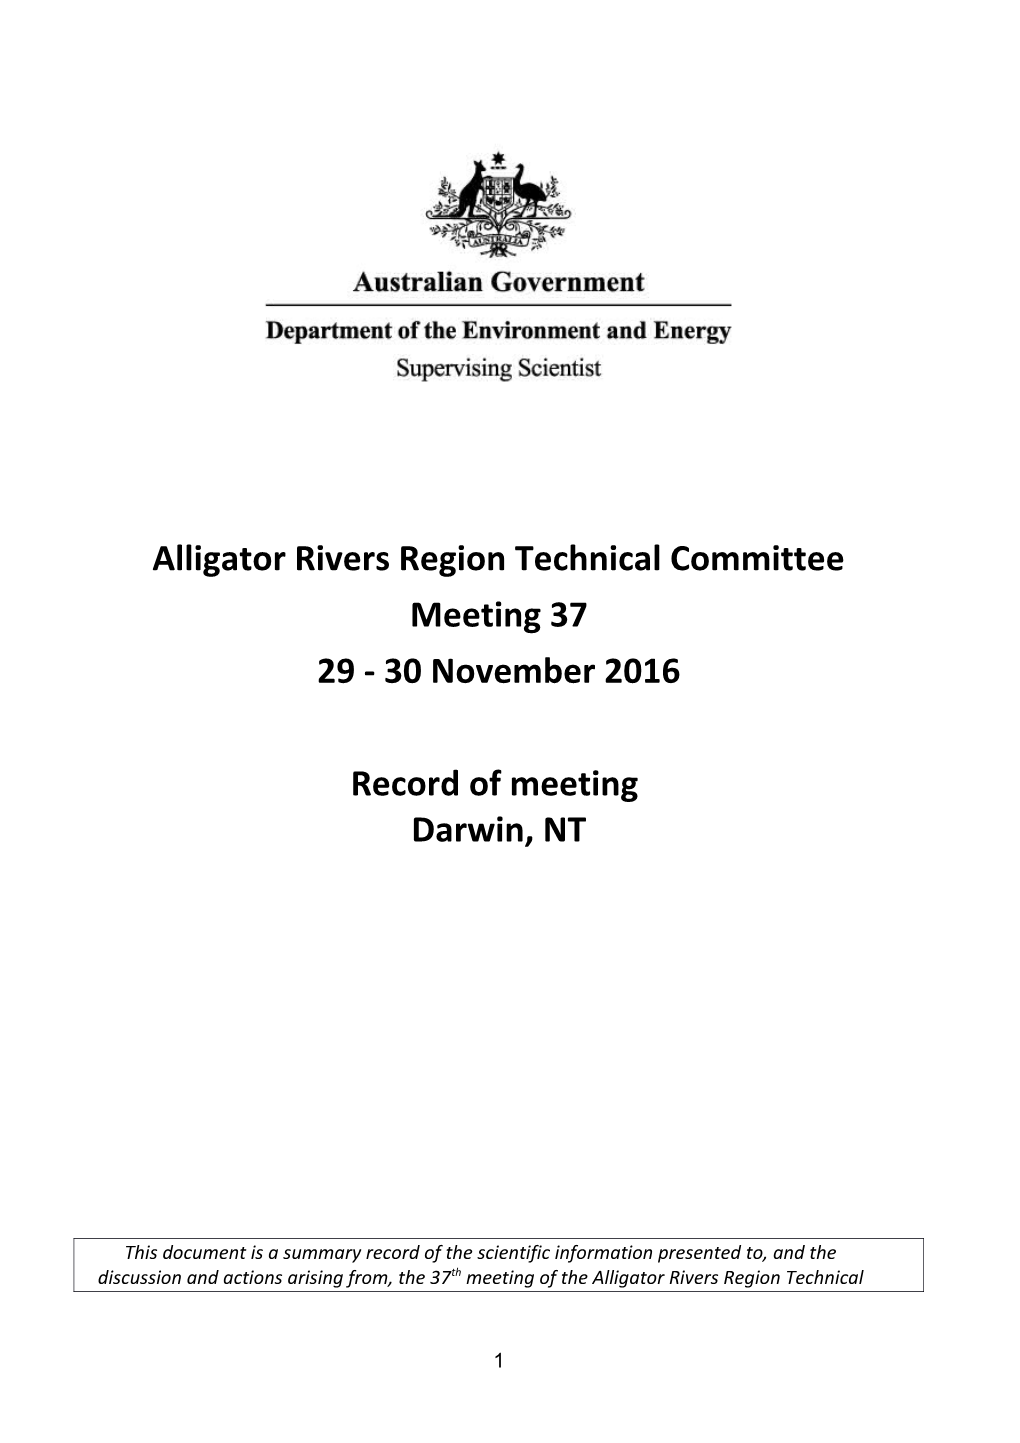 Alligator Rivers Region Technical Committee 37 - November 2016 - Meeting Record